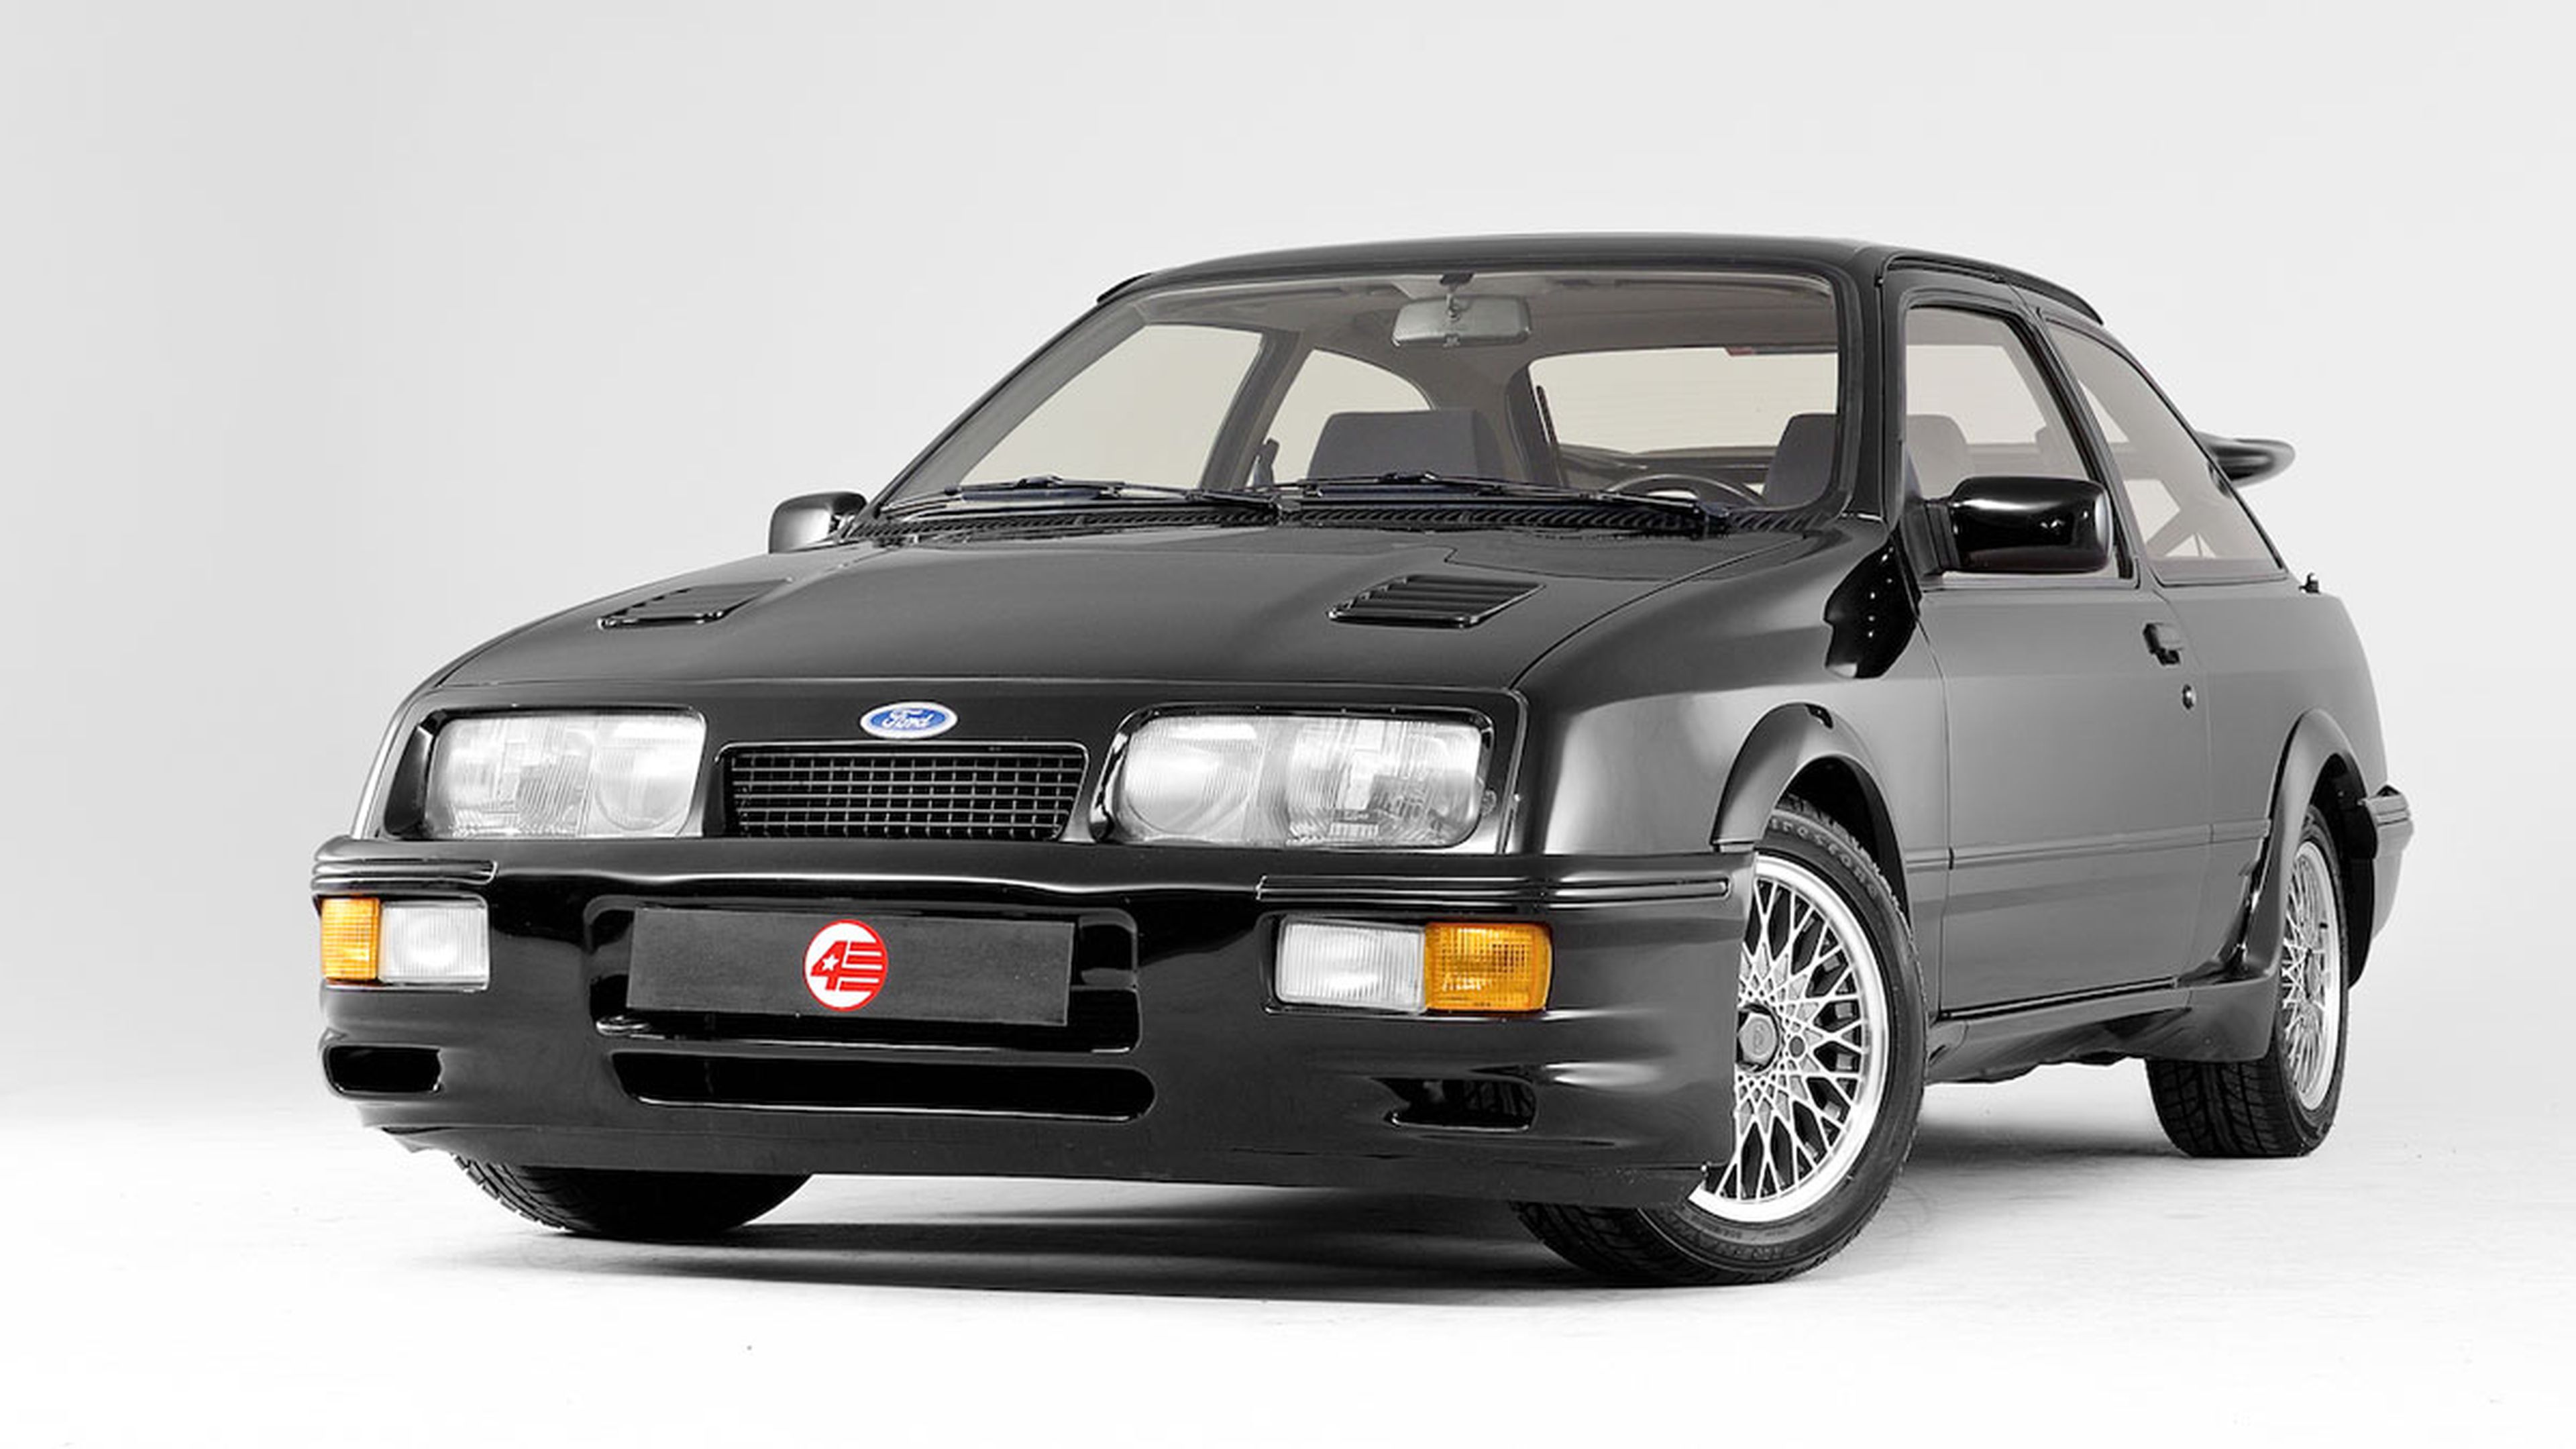 Ford Sierra RS Cosworth motor turbo